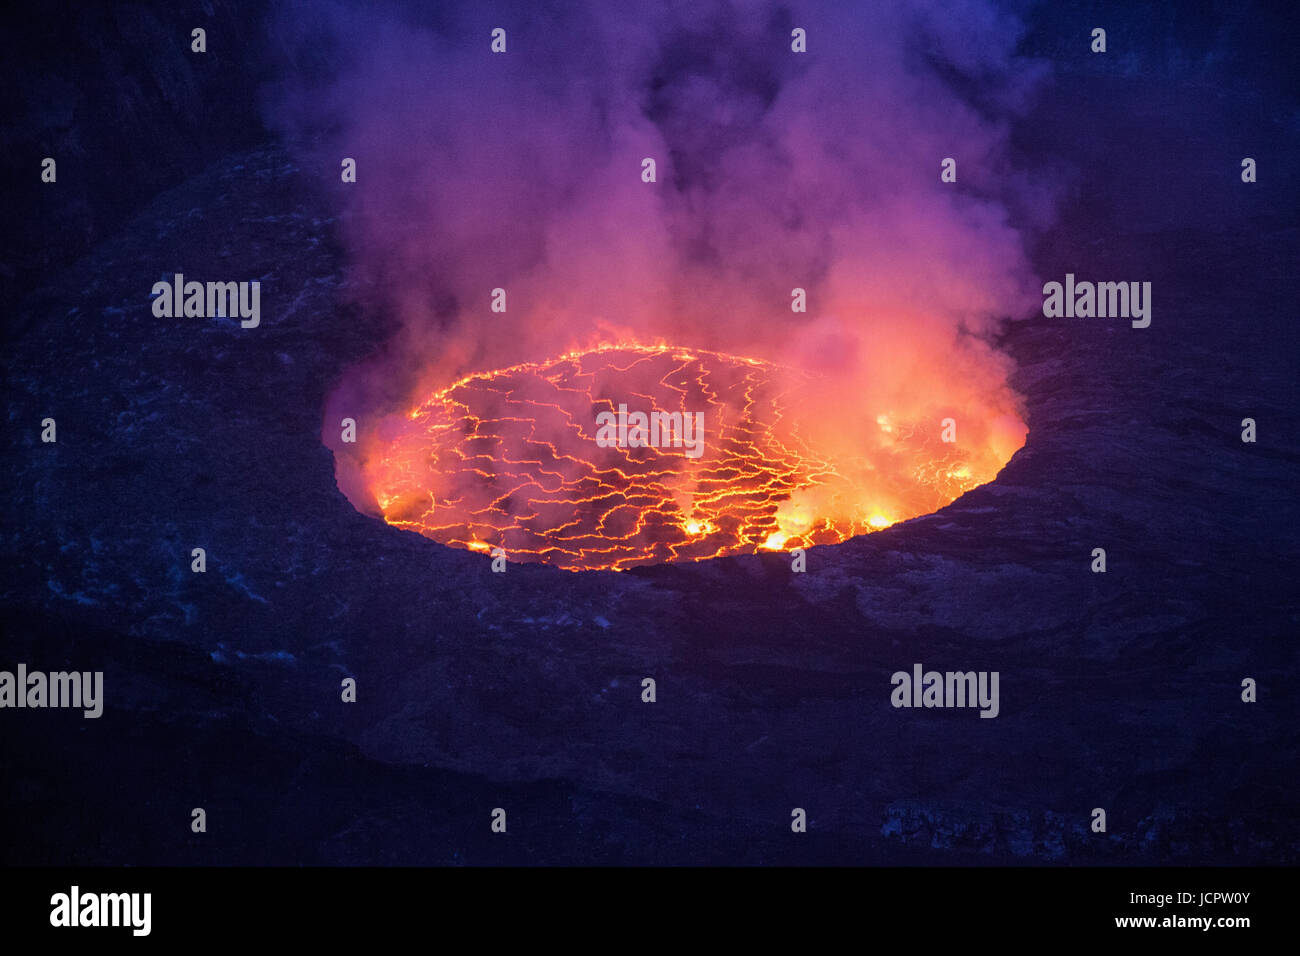 Steam rises from the biggest lava lake in the world at Nyiragongo volcano. It is one of eight volcanoes within the Virunga National Park/DR Congo. Stock Photo